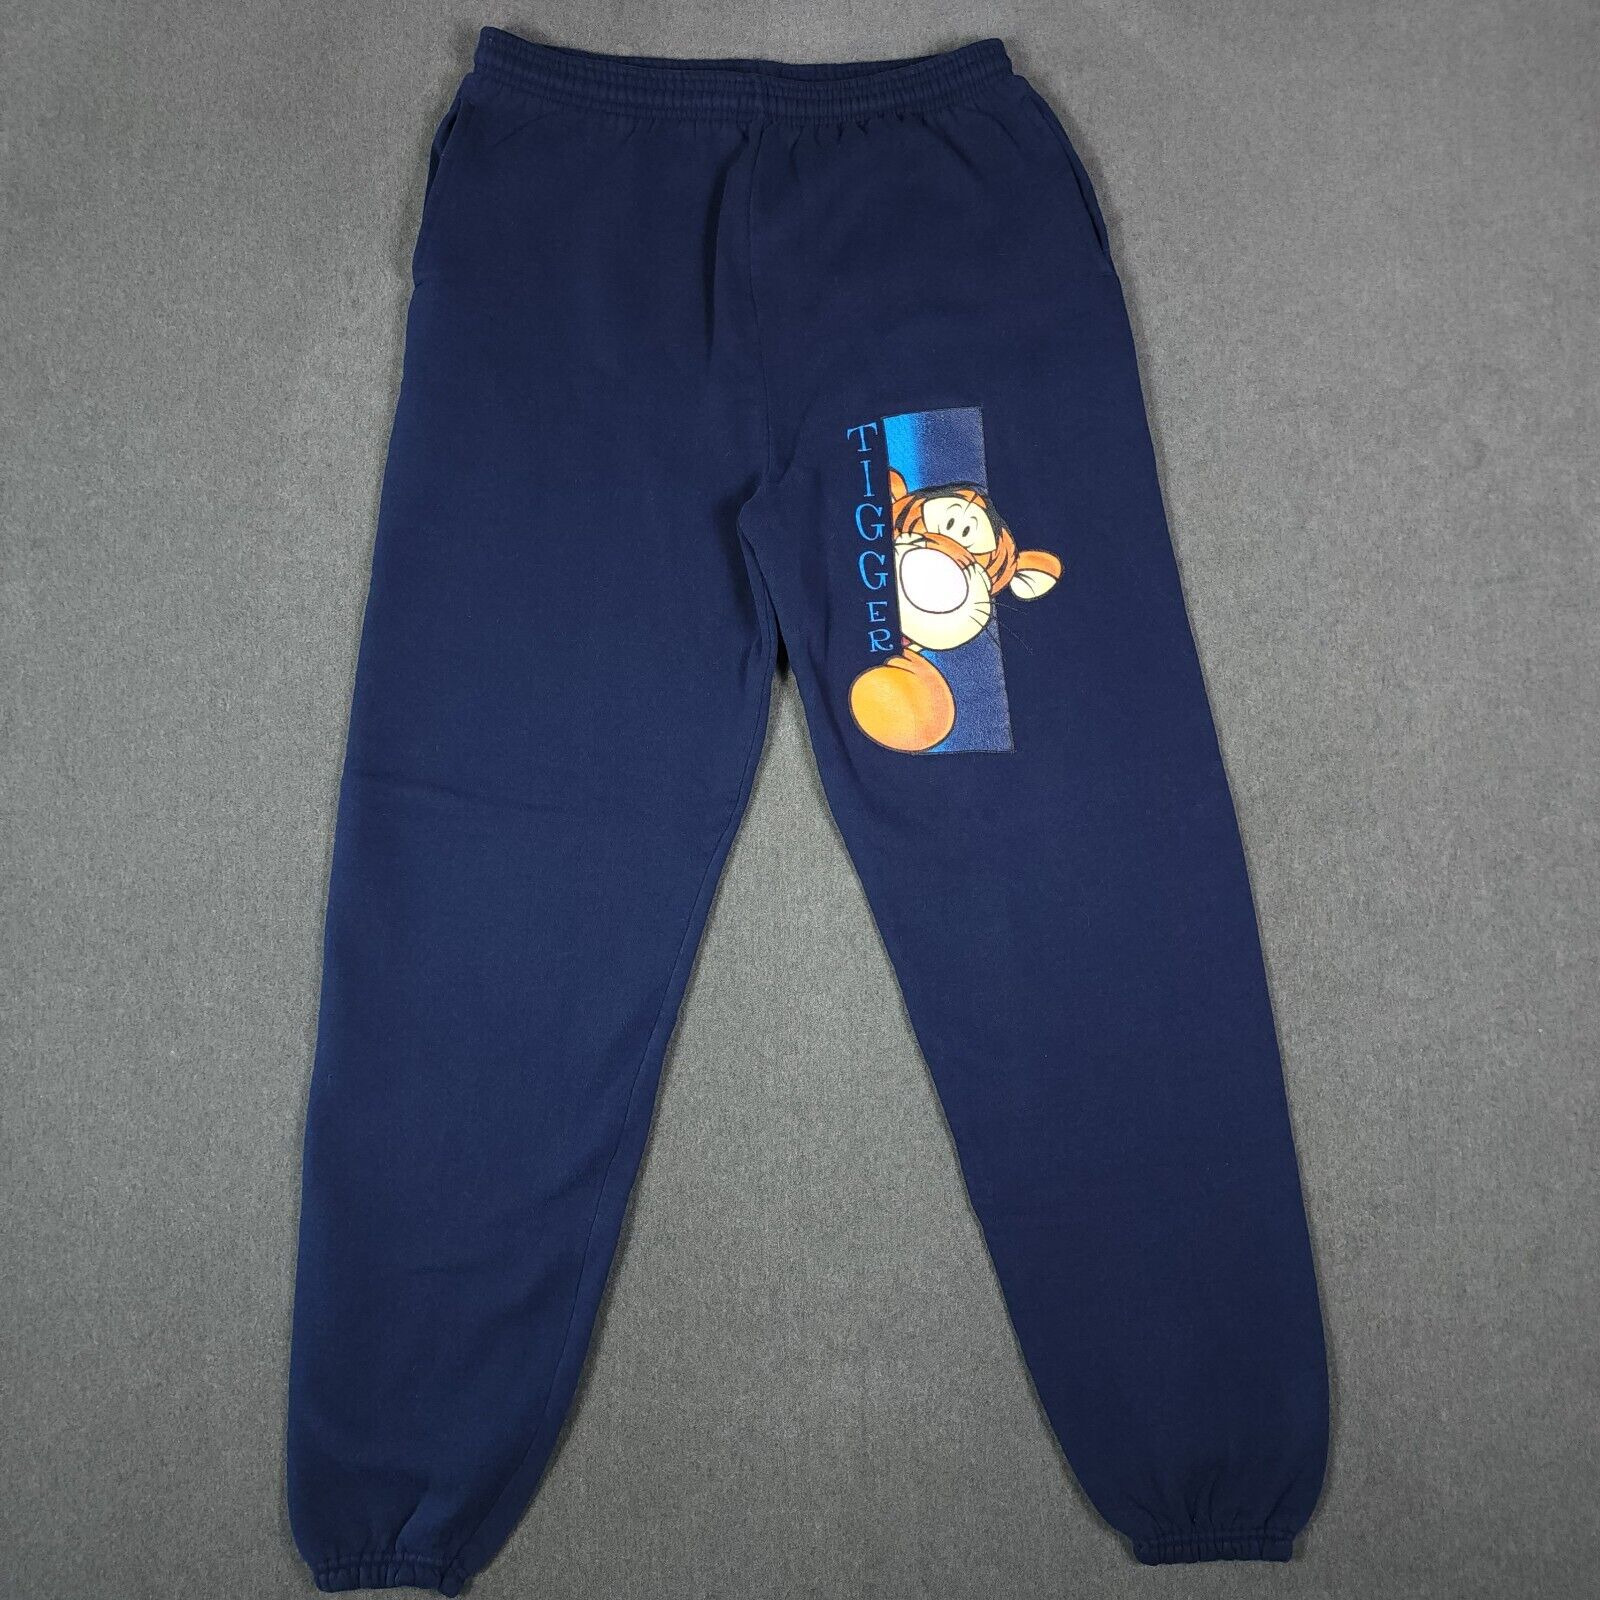 Vintage 90s Disney Sweat Pants Large Blue Tigger Winnie The Pooh Made in USA